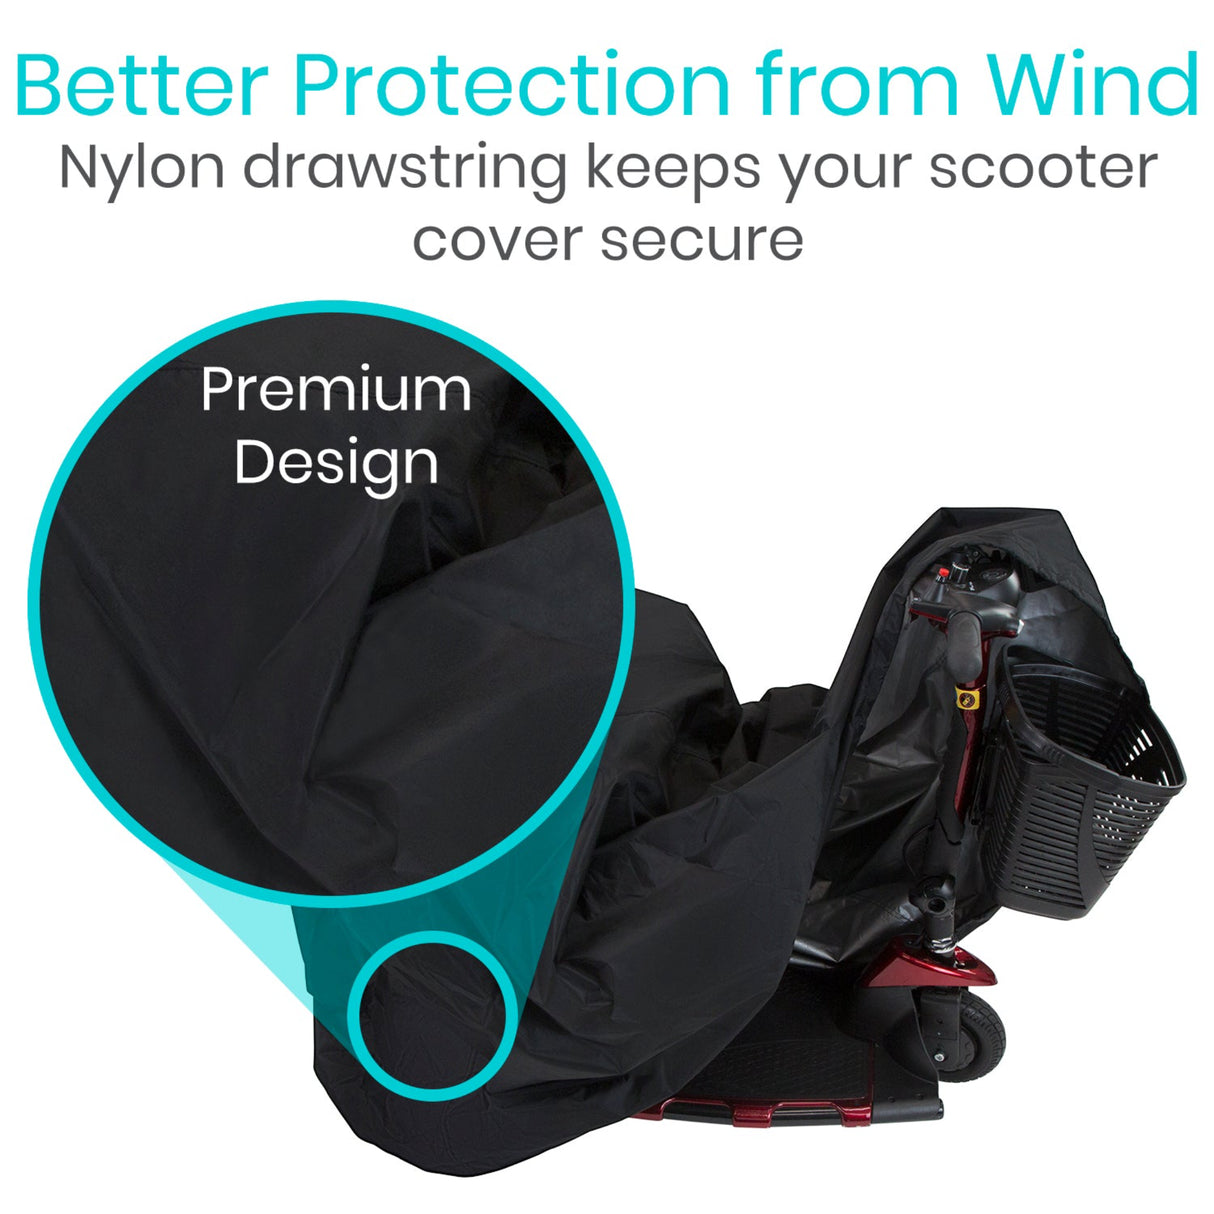 Vive Health Mobility Scooter Cover